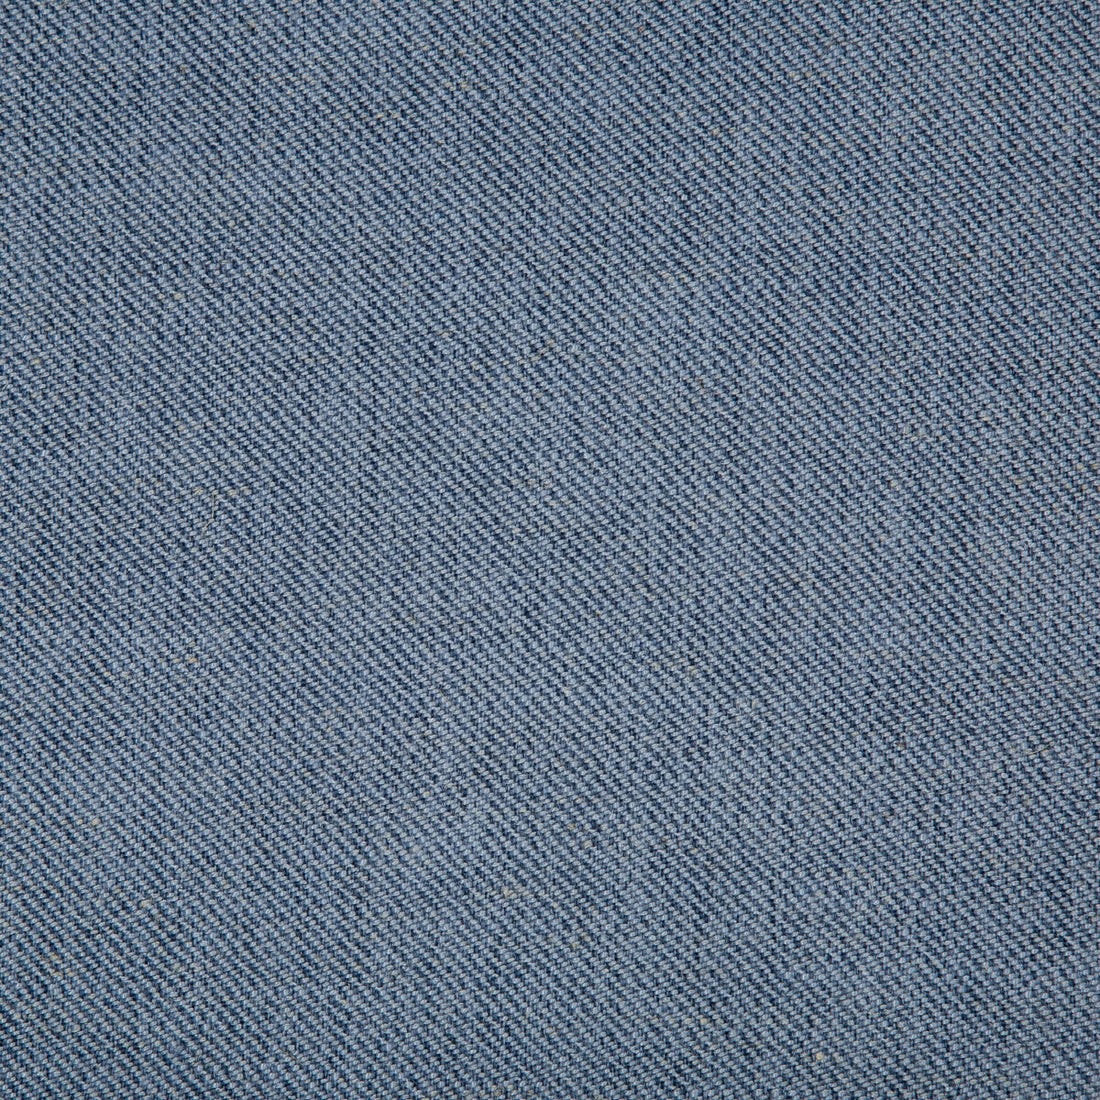 Kravet Smart fabric in 33836-5 color - pattern 33836.5.0 - by Kravet Smart in the Thom Filicia collection